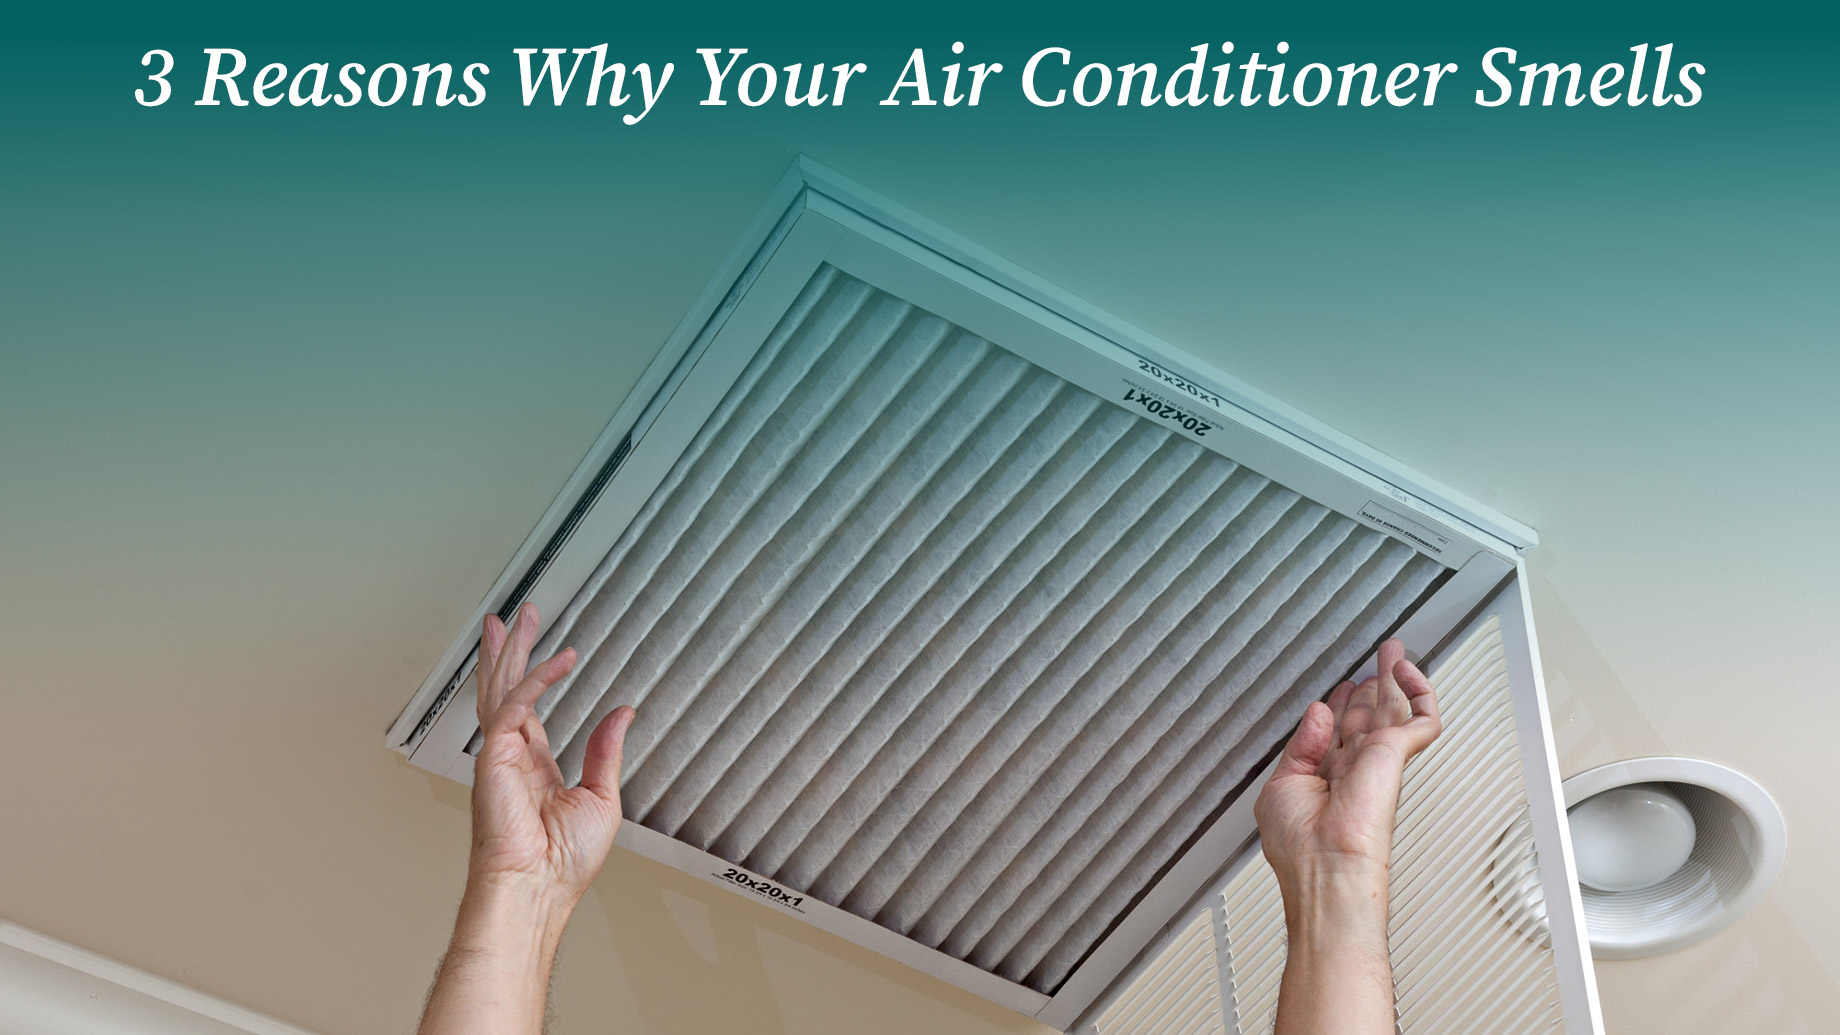 3 Reasons Why Your Air Conditioner Smells